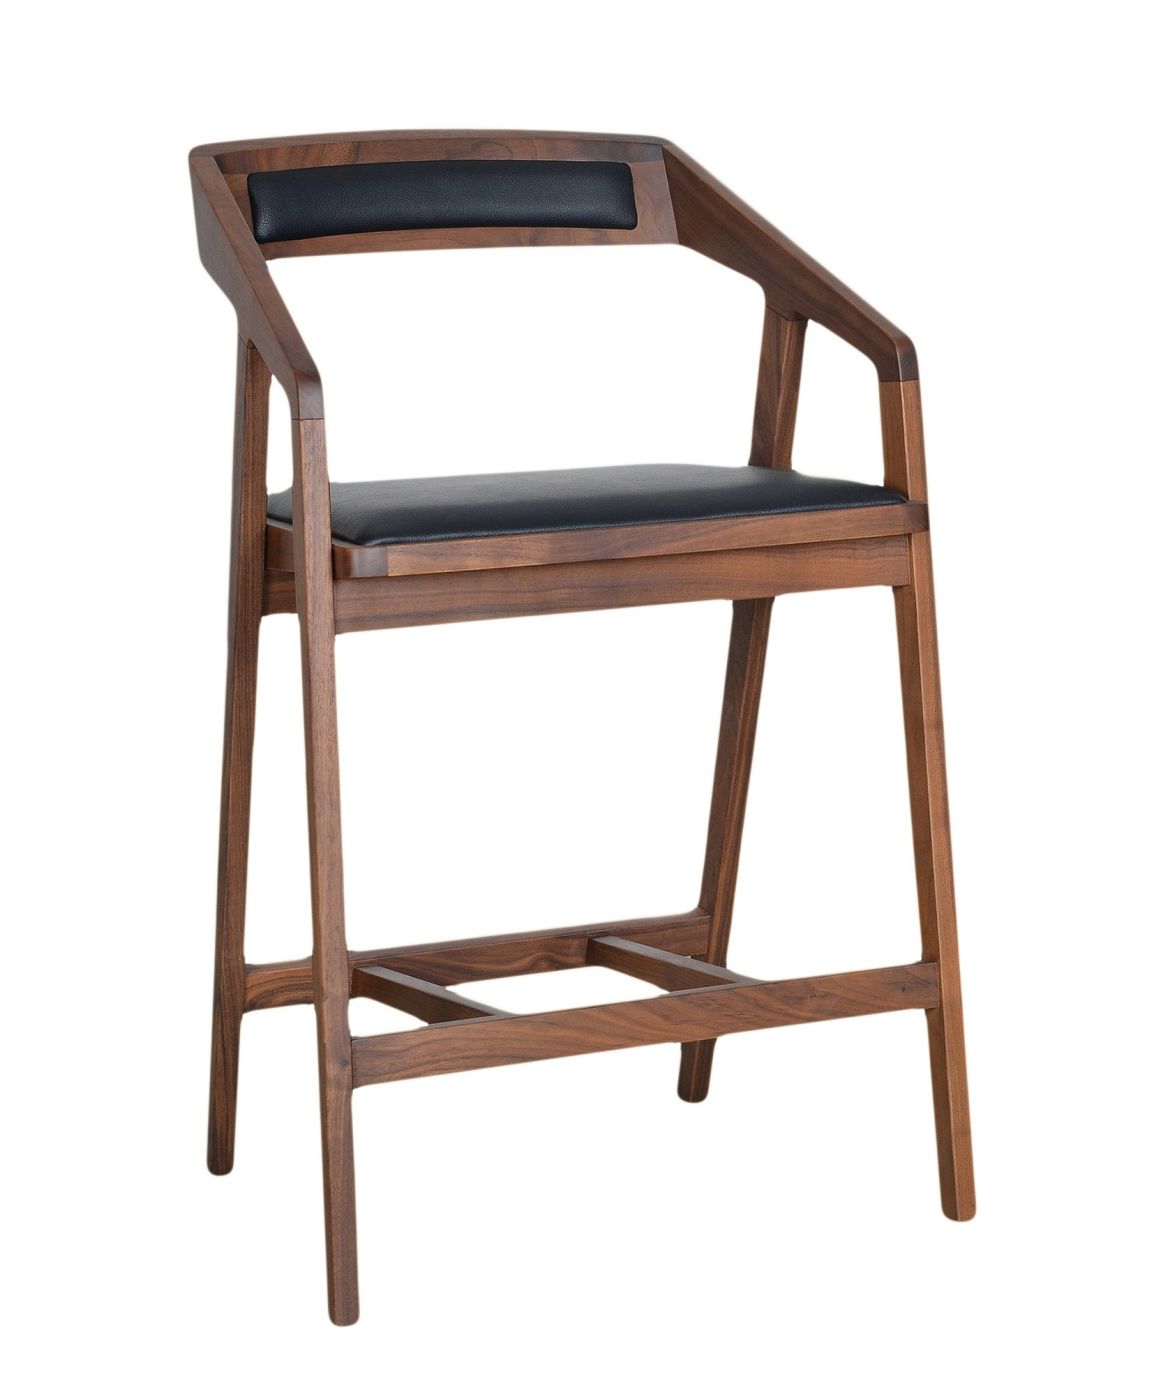 best price on moe's home collection cb102503 padma counter stool american  walnut wood pvc only 71400 at contemporary furniture warehouse